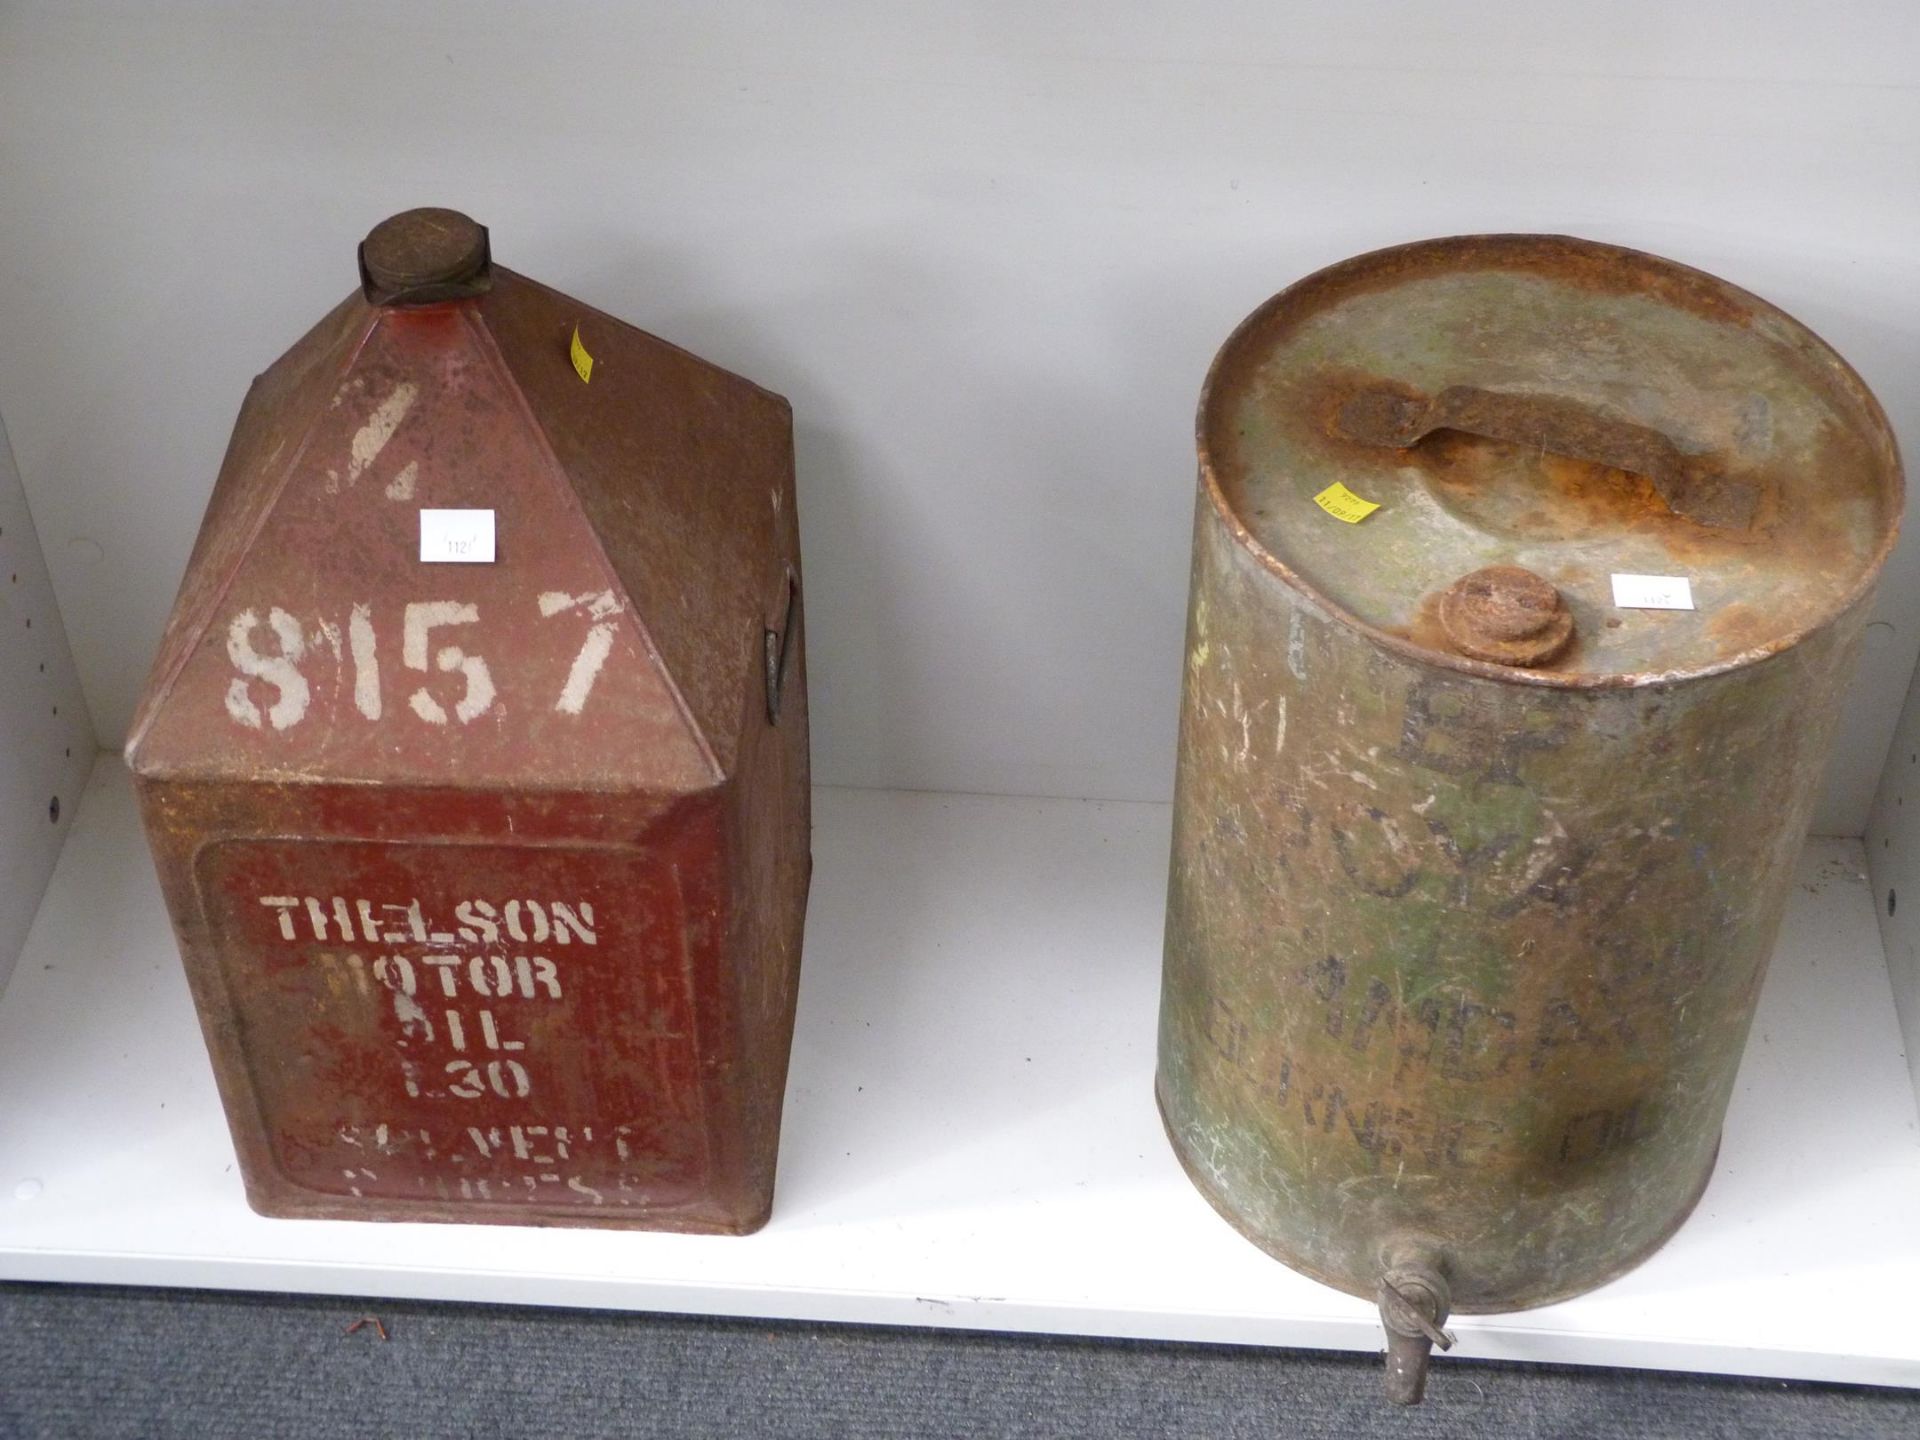 A Thelson Motor Oil Pyramid Drum along with a BP Royal Standard Burning Oil Drum. (2) (Est. £80 - £